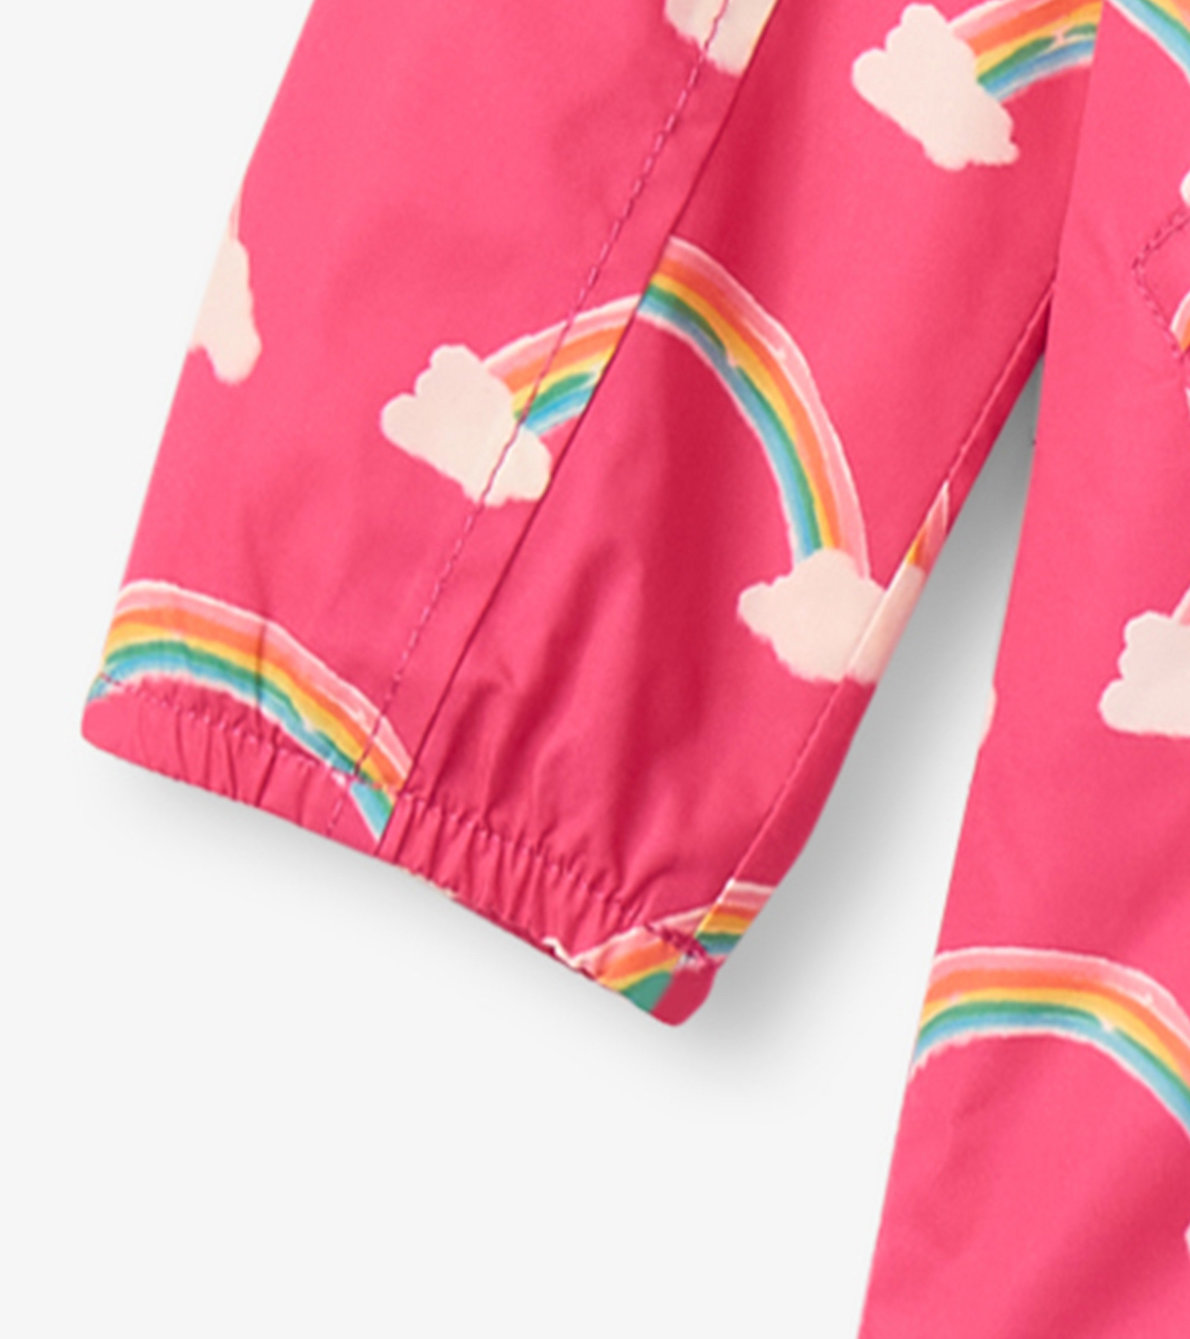 View larger image of Girls Summer Rainbow Field Jacket